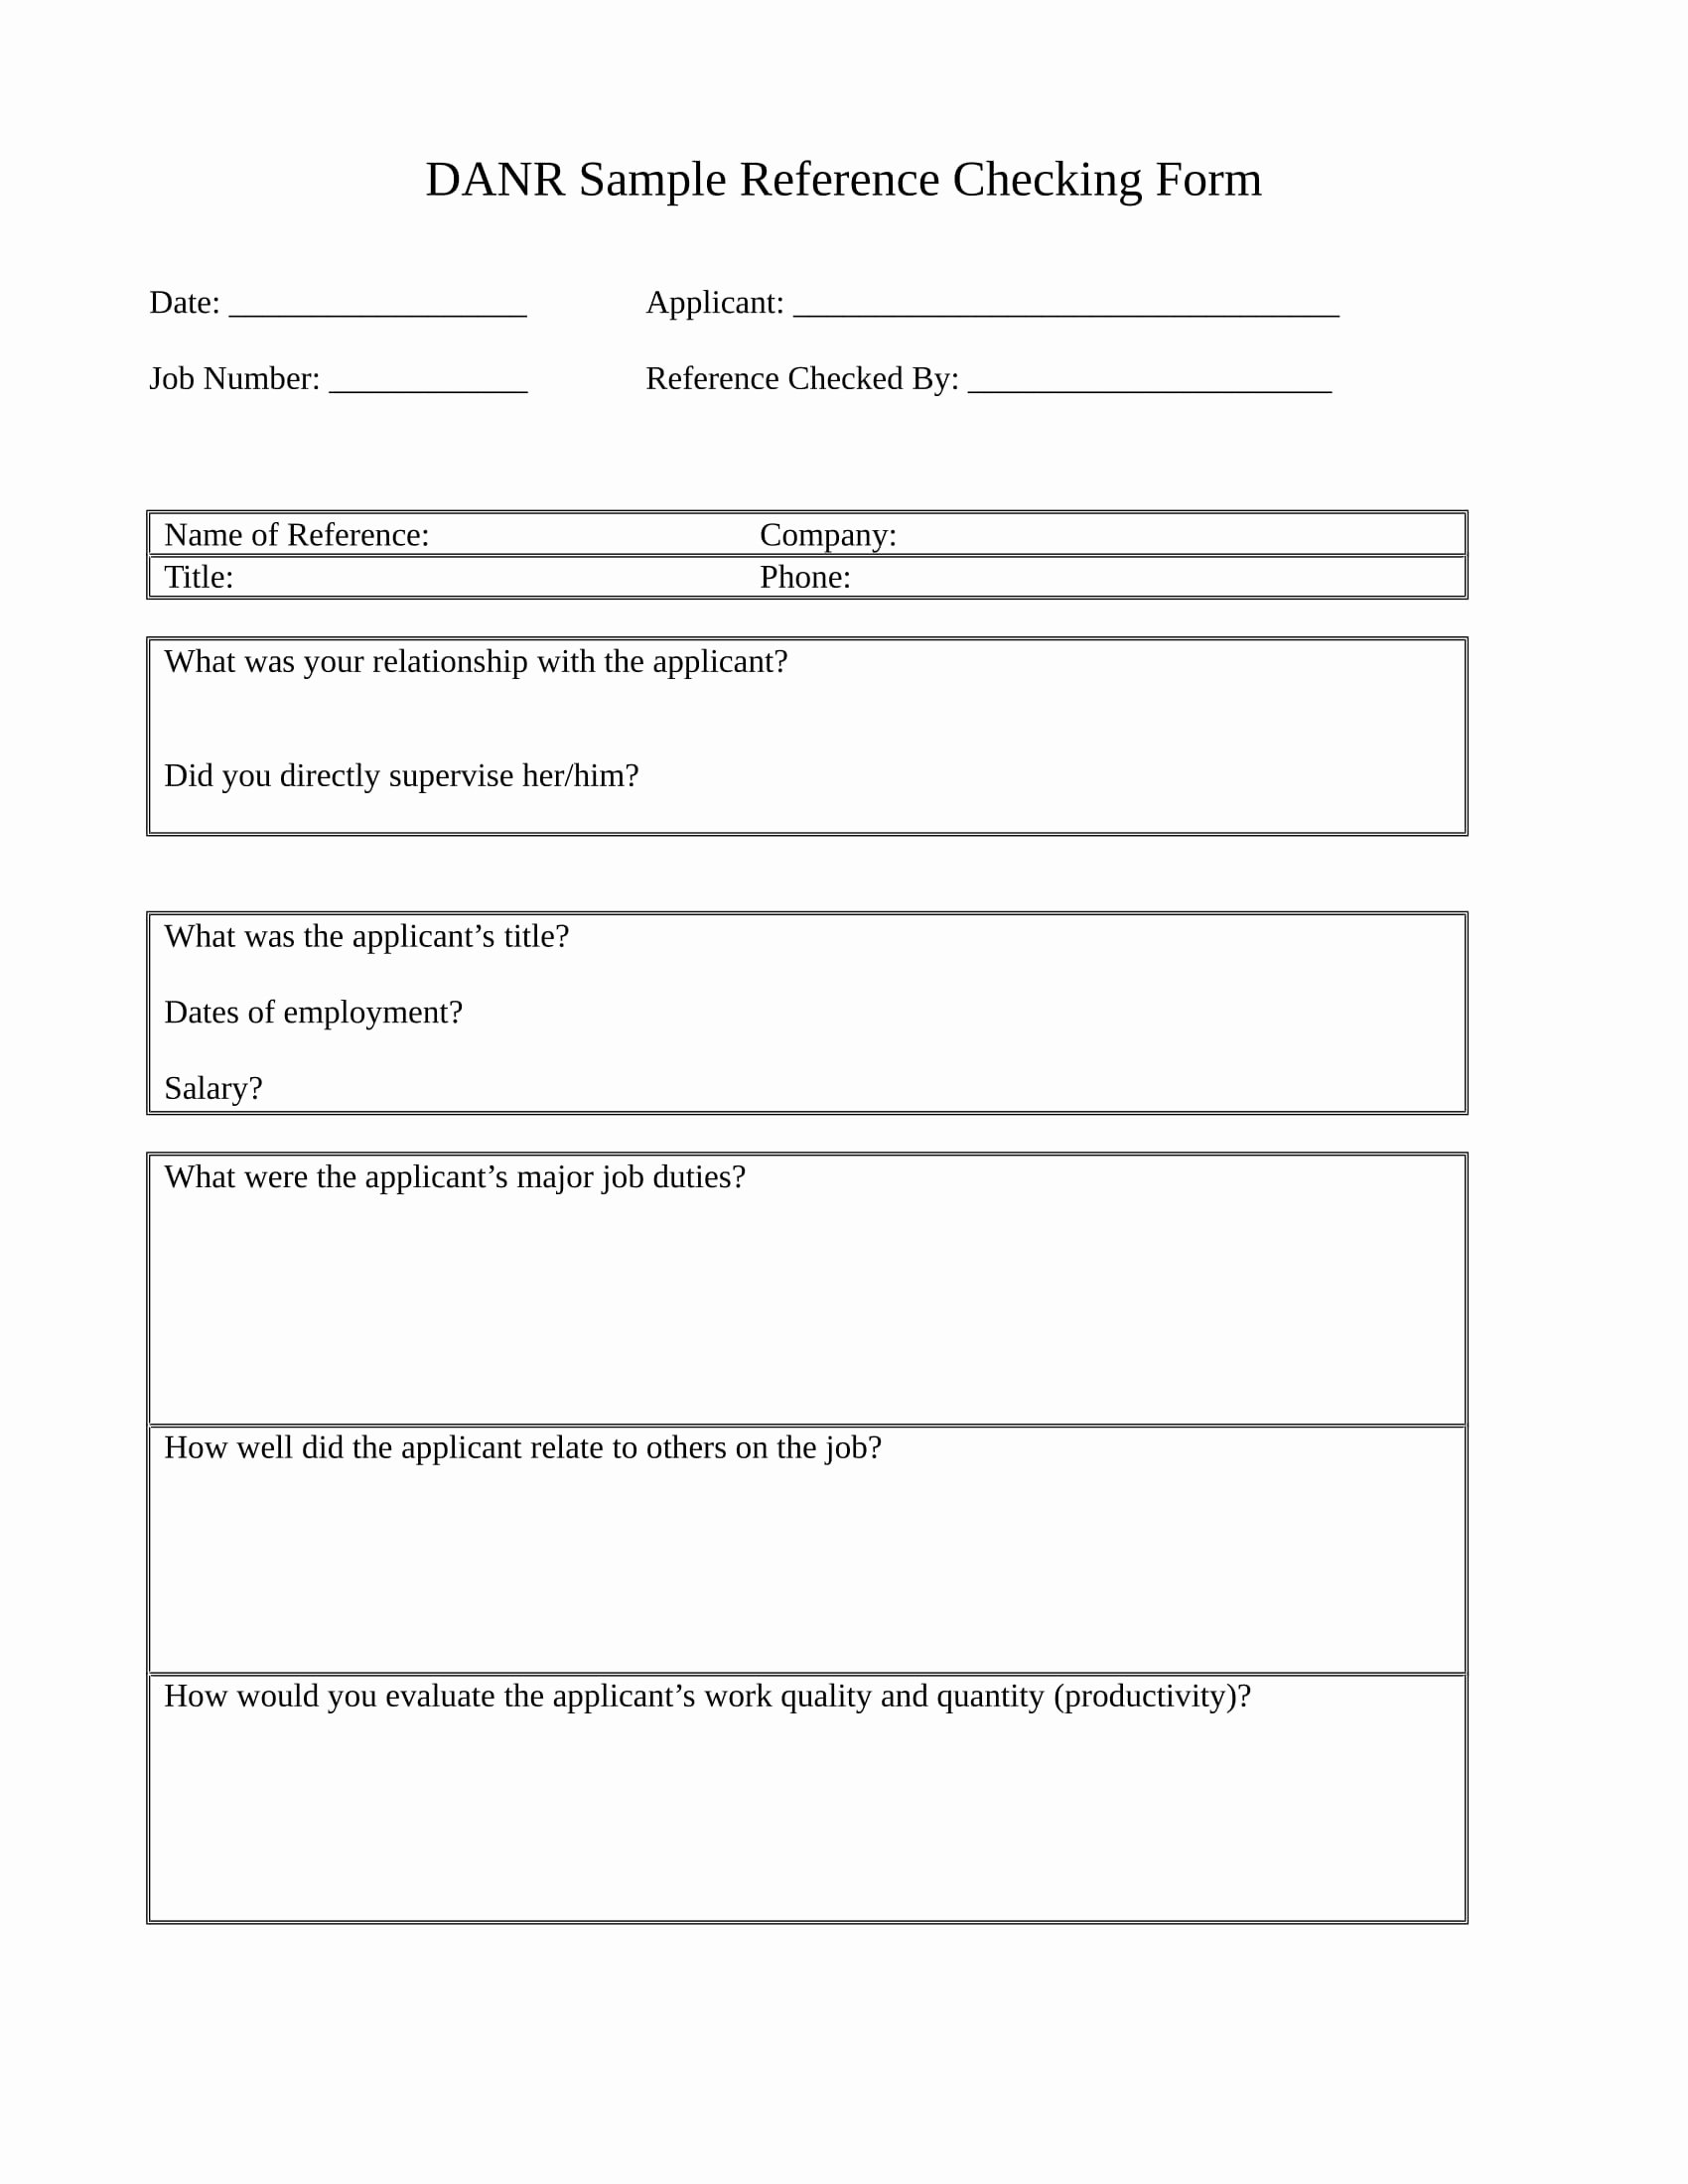 Reference Check form Template Beautiful 11 Reference Checking forms &amp; Templates Pdf Doc